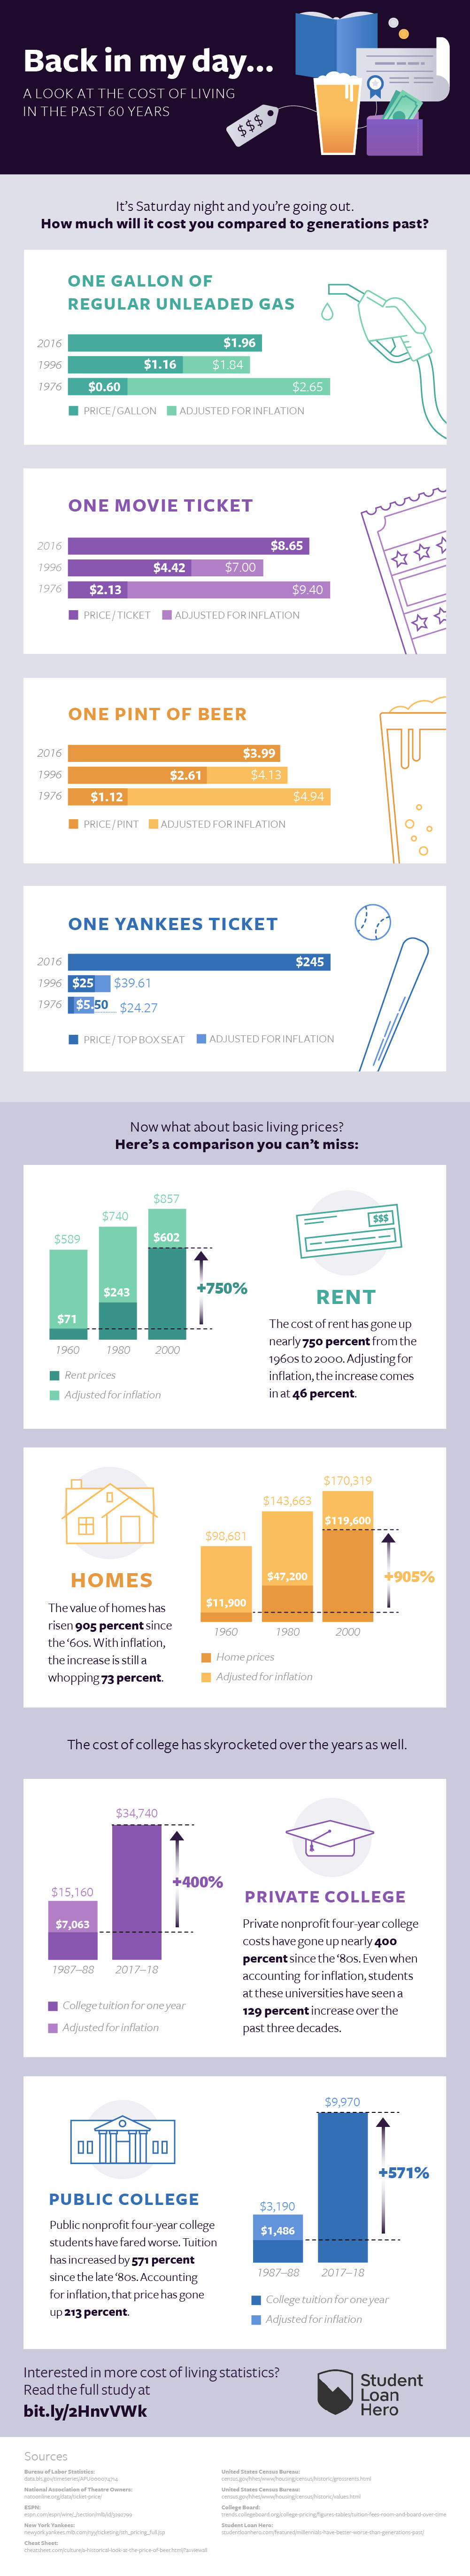 Student Loan Hero takes a look at the cost of various expenses over the years to see if millennials have it better or worse than past generations. This infographic covers how the cost of rent, college, homeownership, gas, beer and more have changed over time.